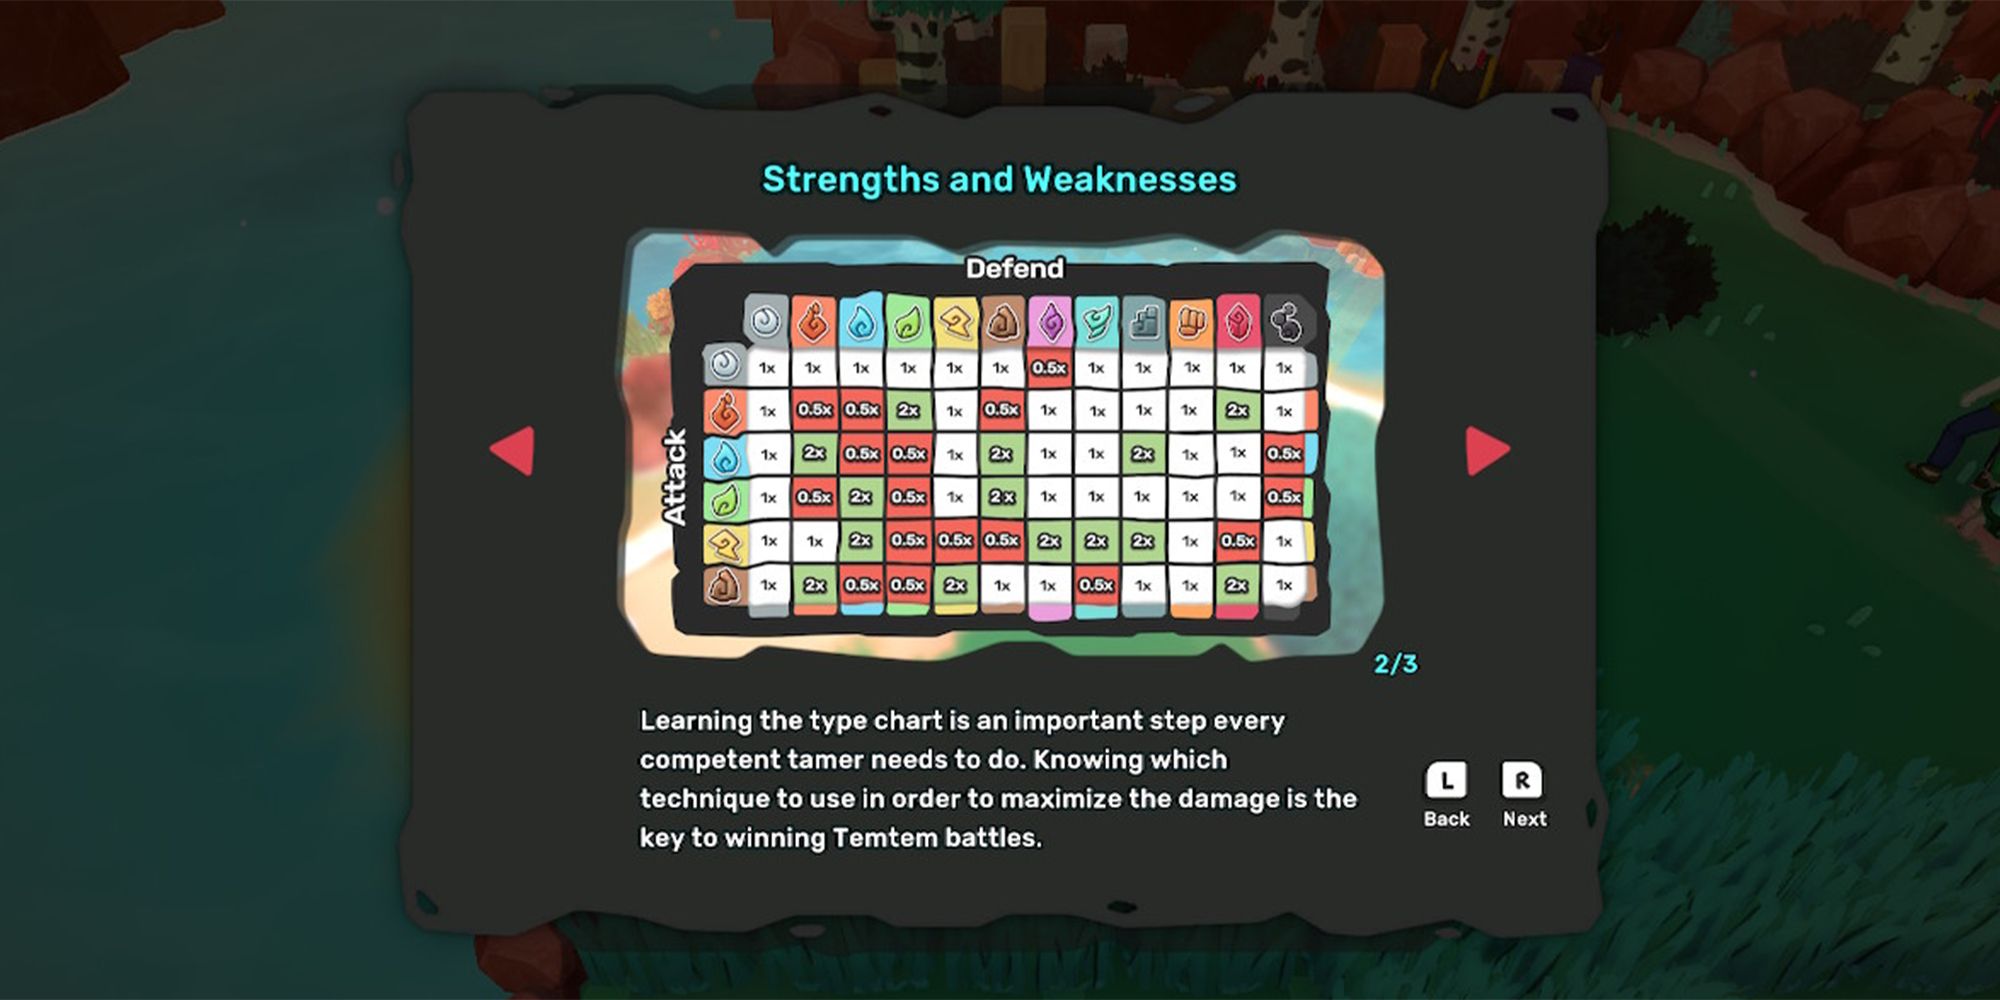 temtem strengths and weaknesses tip page